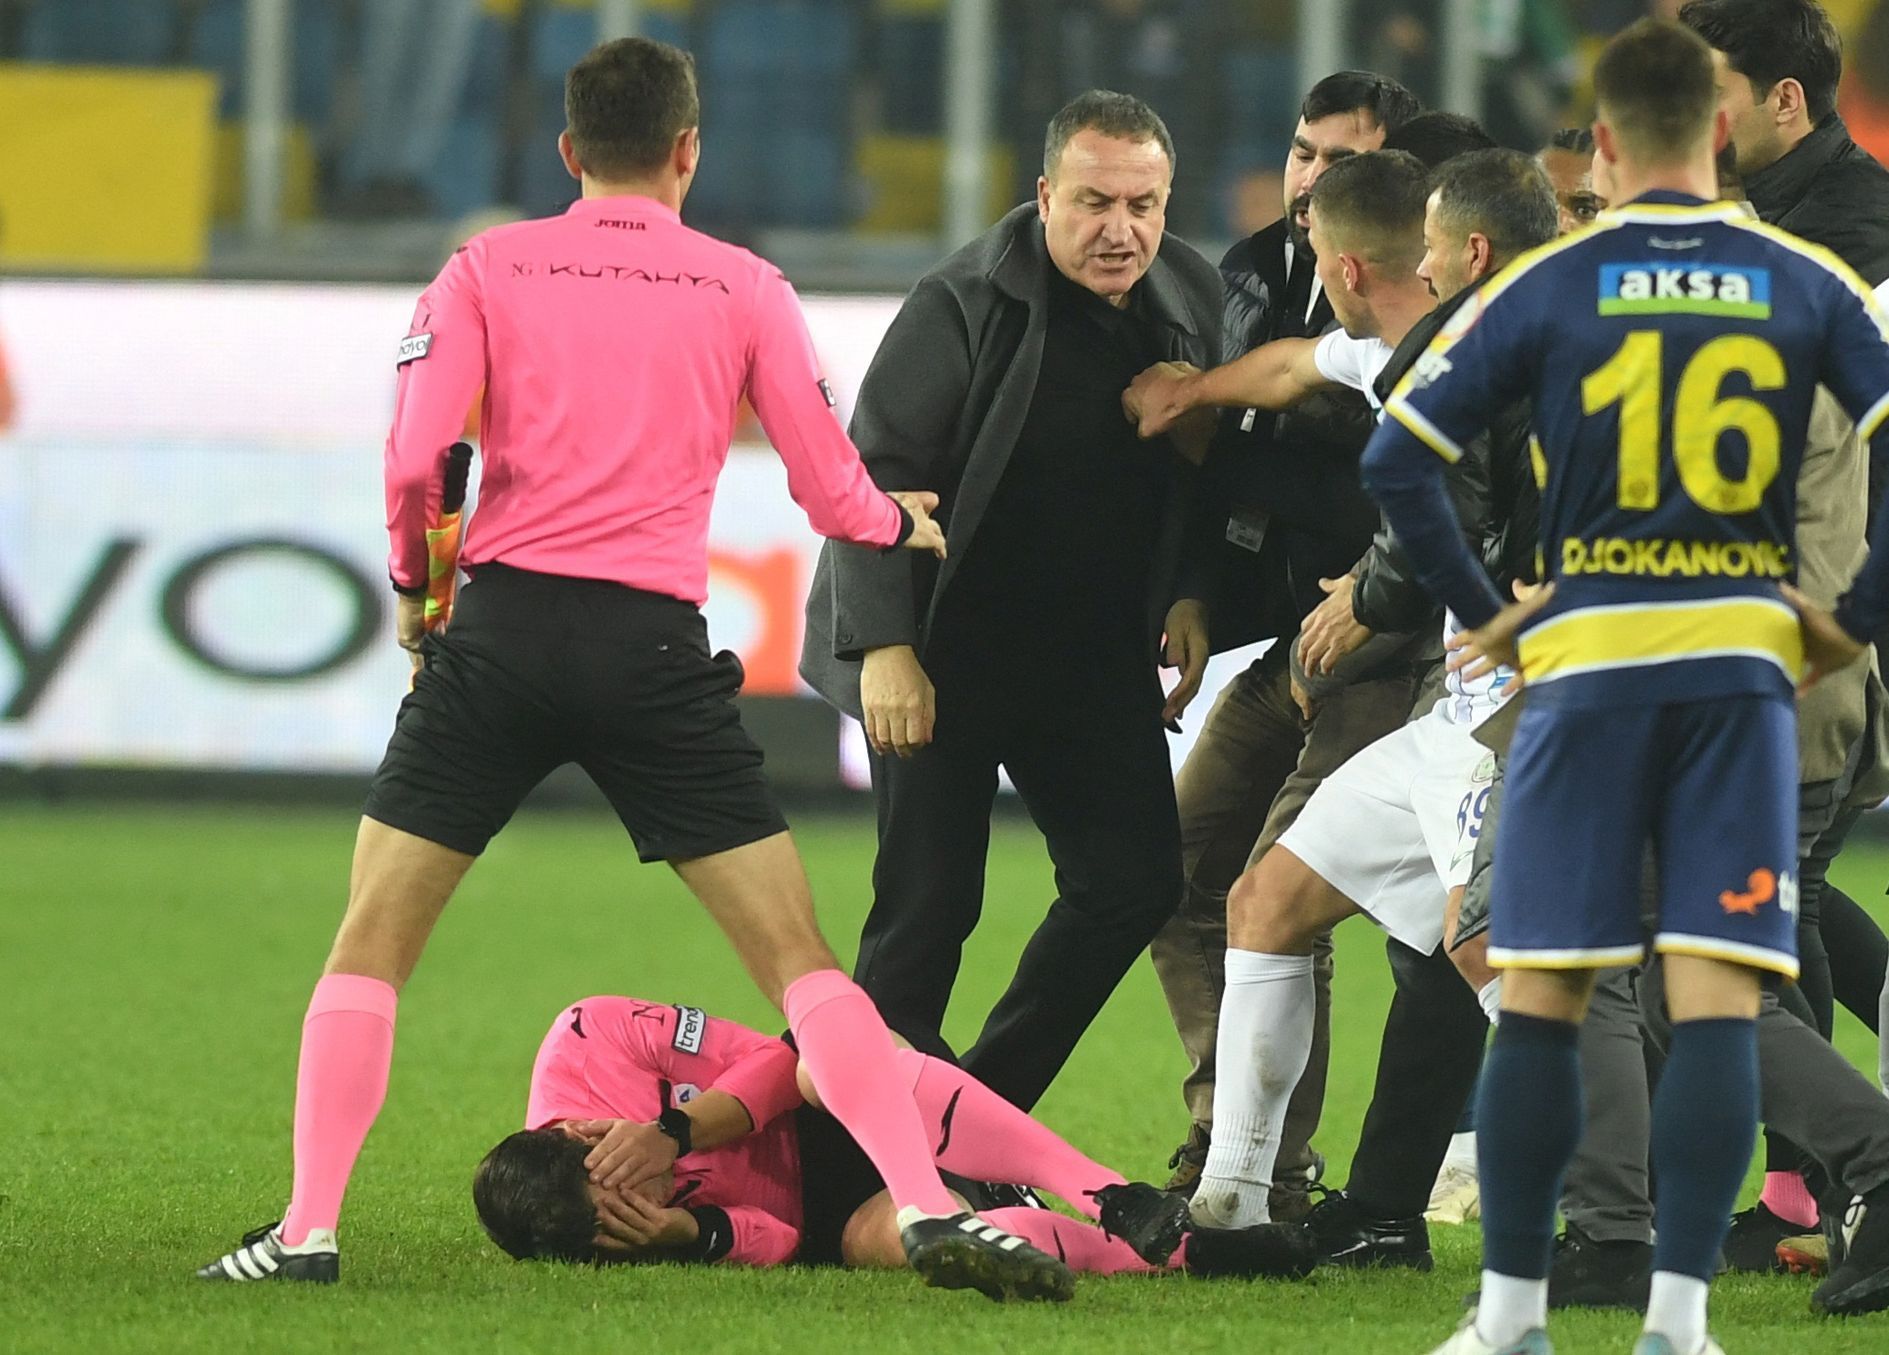 Turkish club president punches referee in the face after Super Lig game in Ankara